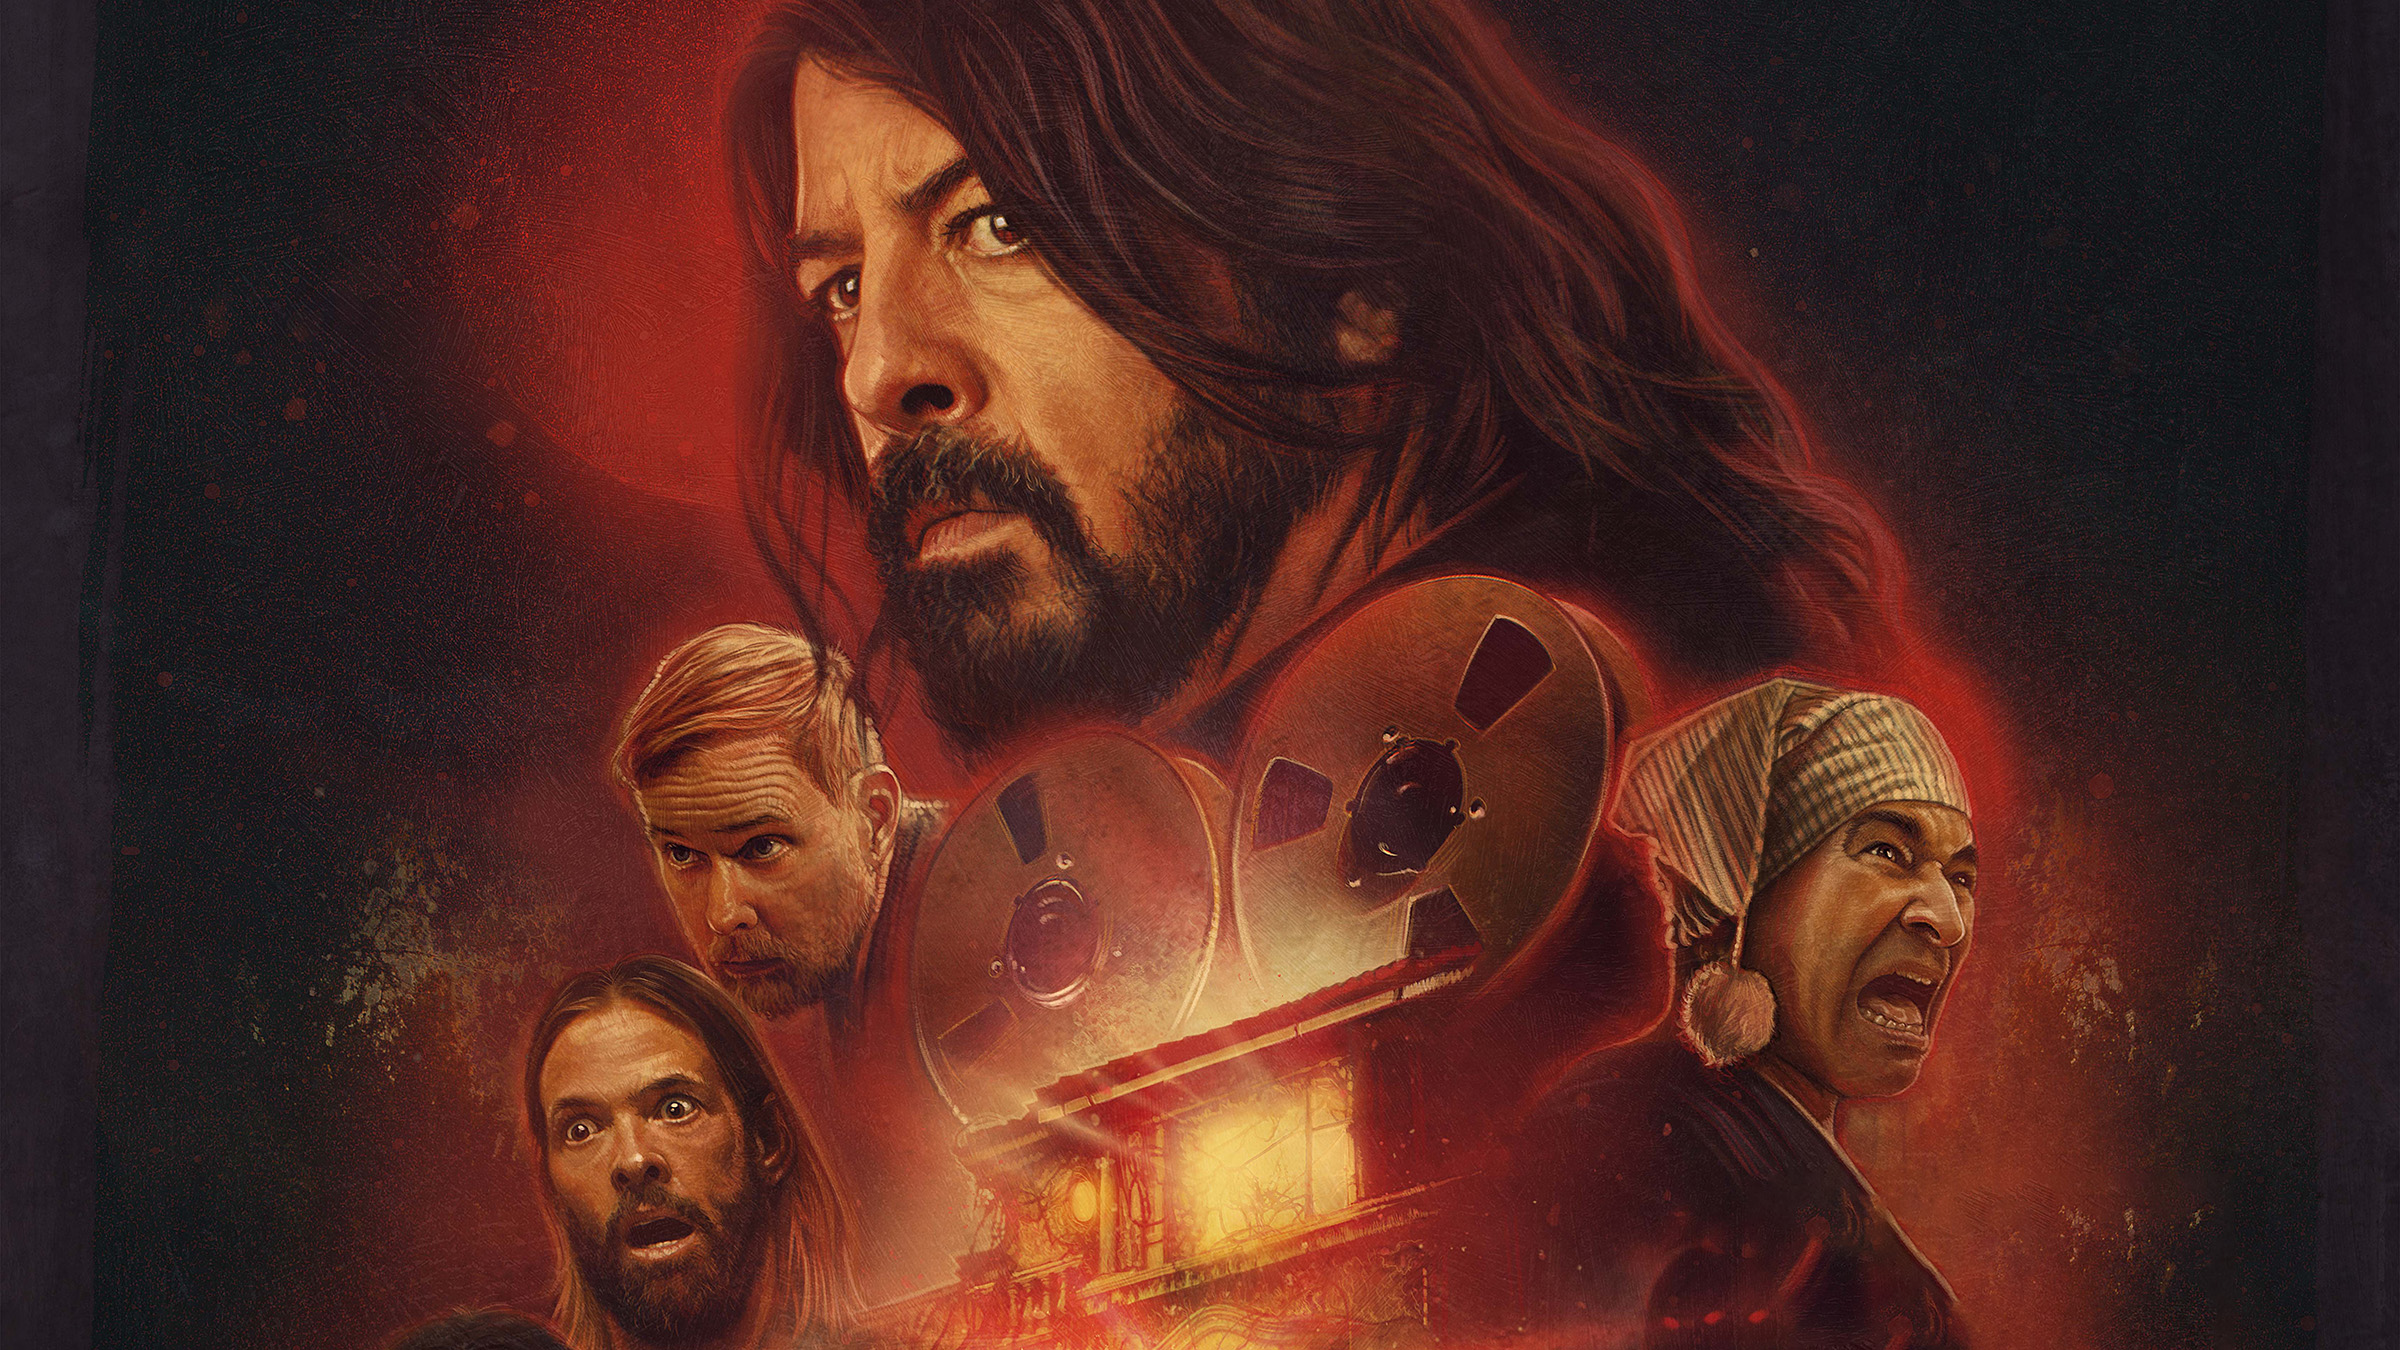 Made in Frame: Foo Fighters Try Death Metal in Horror-Comedy “Studio 666”